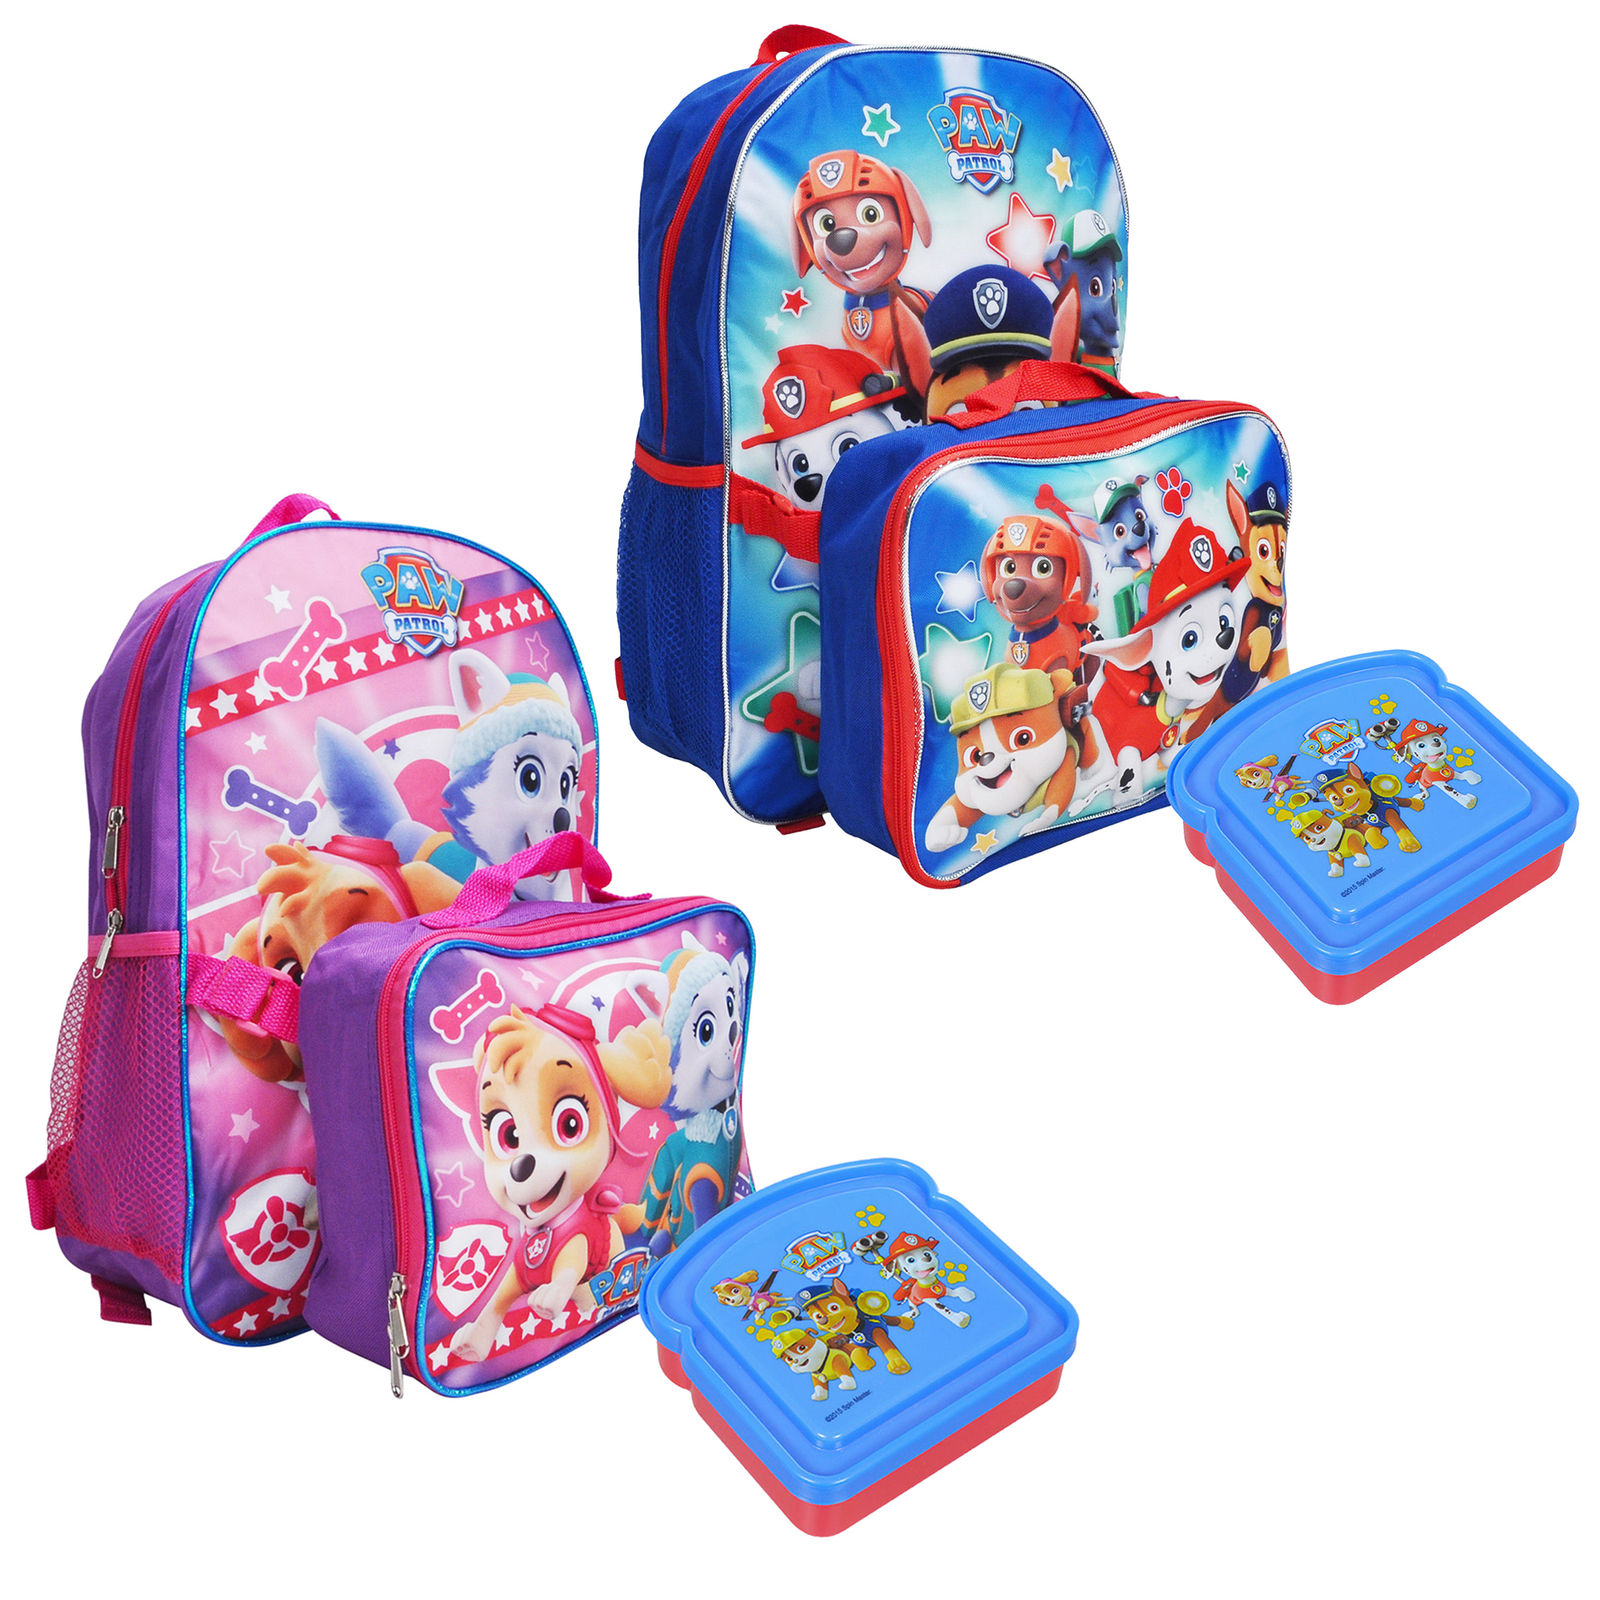 Paw Patrol Backpack, Lunch Bag, and Sandwich Container Set Just $17.99! (Boys or Girls)